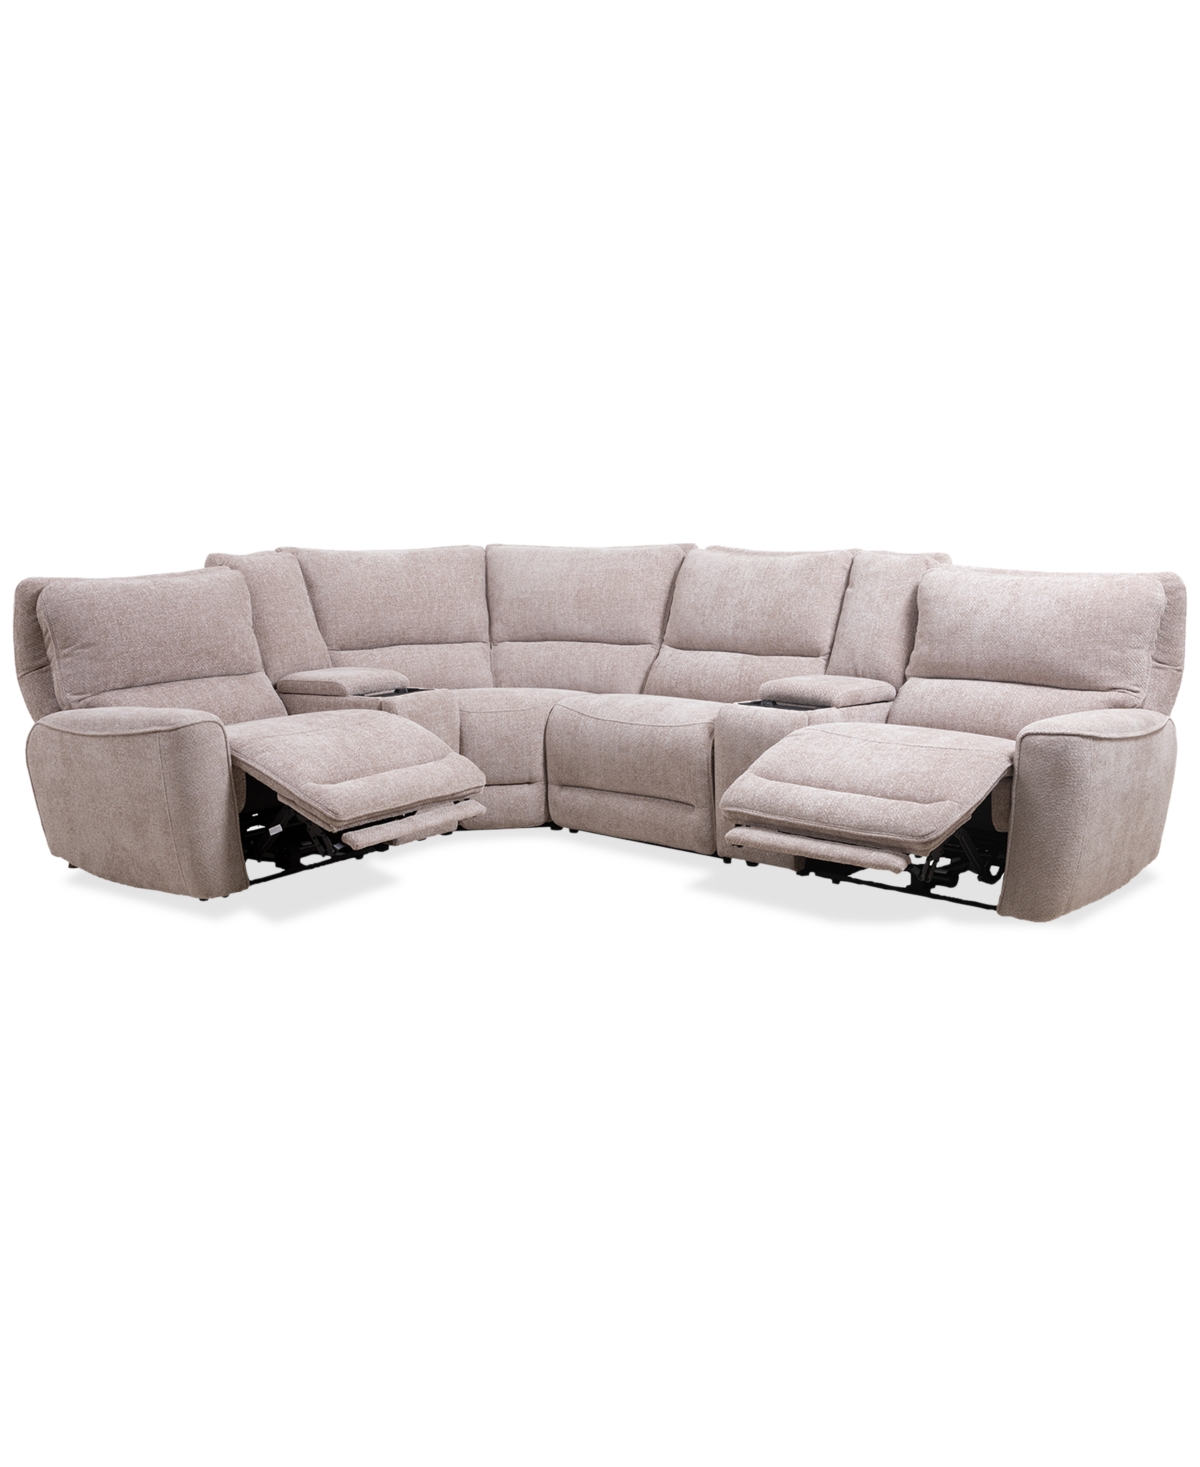 Macy's Deklyn 129" 7-pc. Zero Gravity Fabric Sectional With 2 Power Recliners & 2 Consoles, Created For Mac In Cobblestone